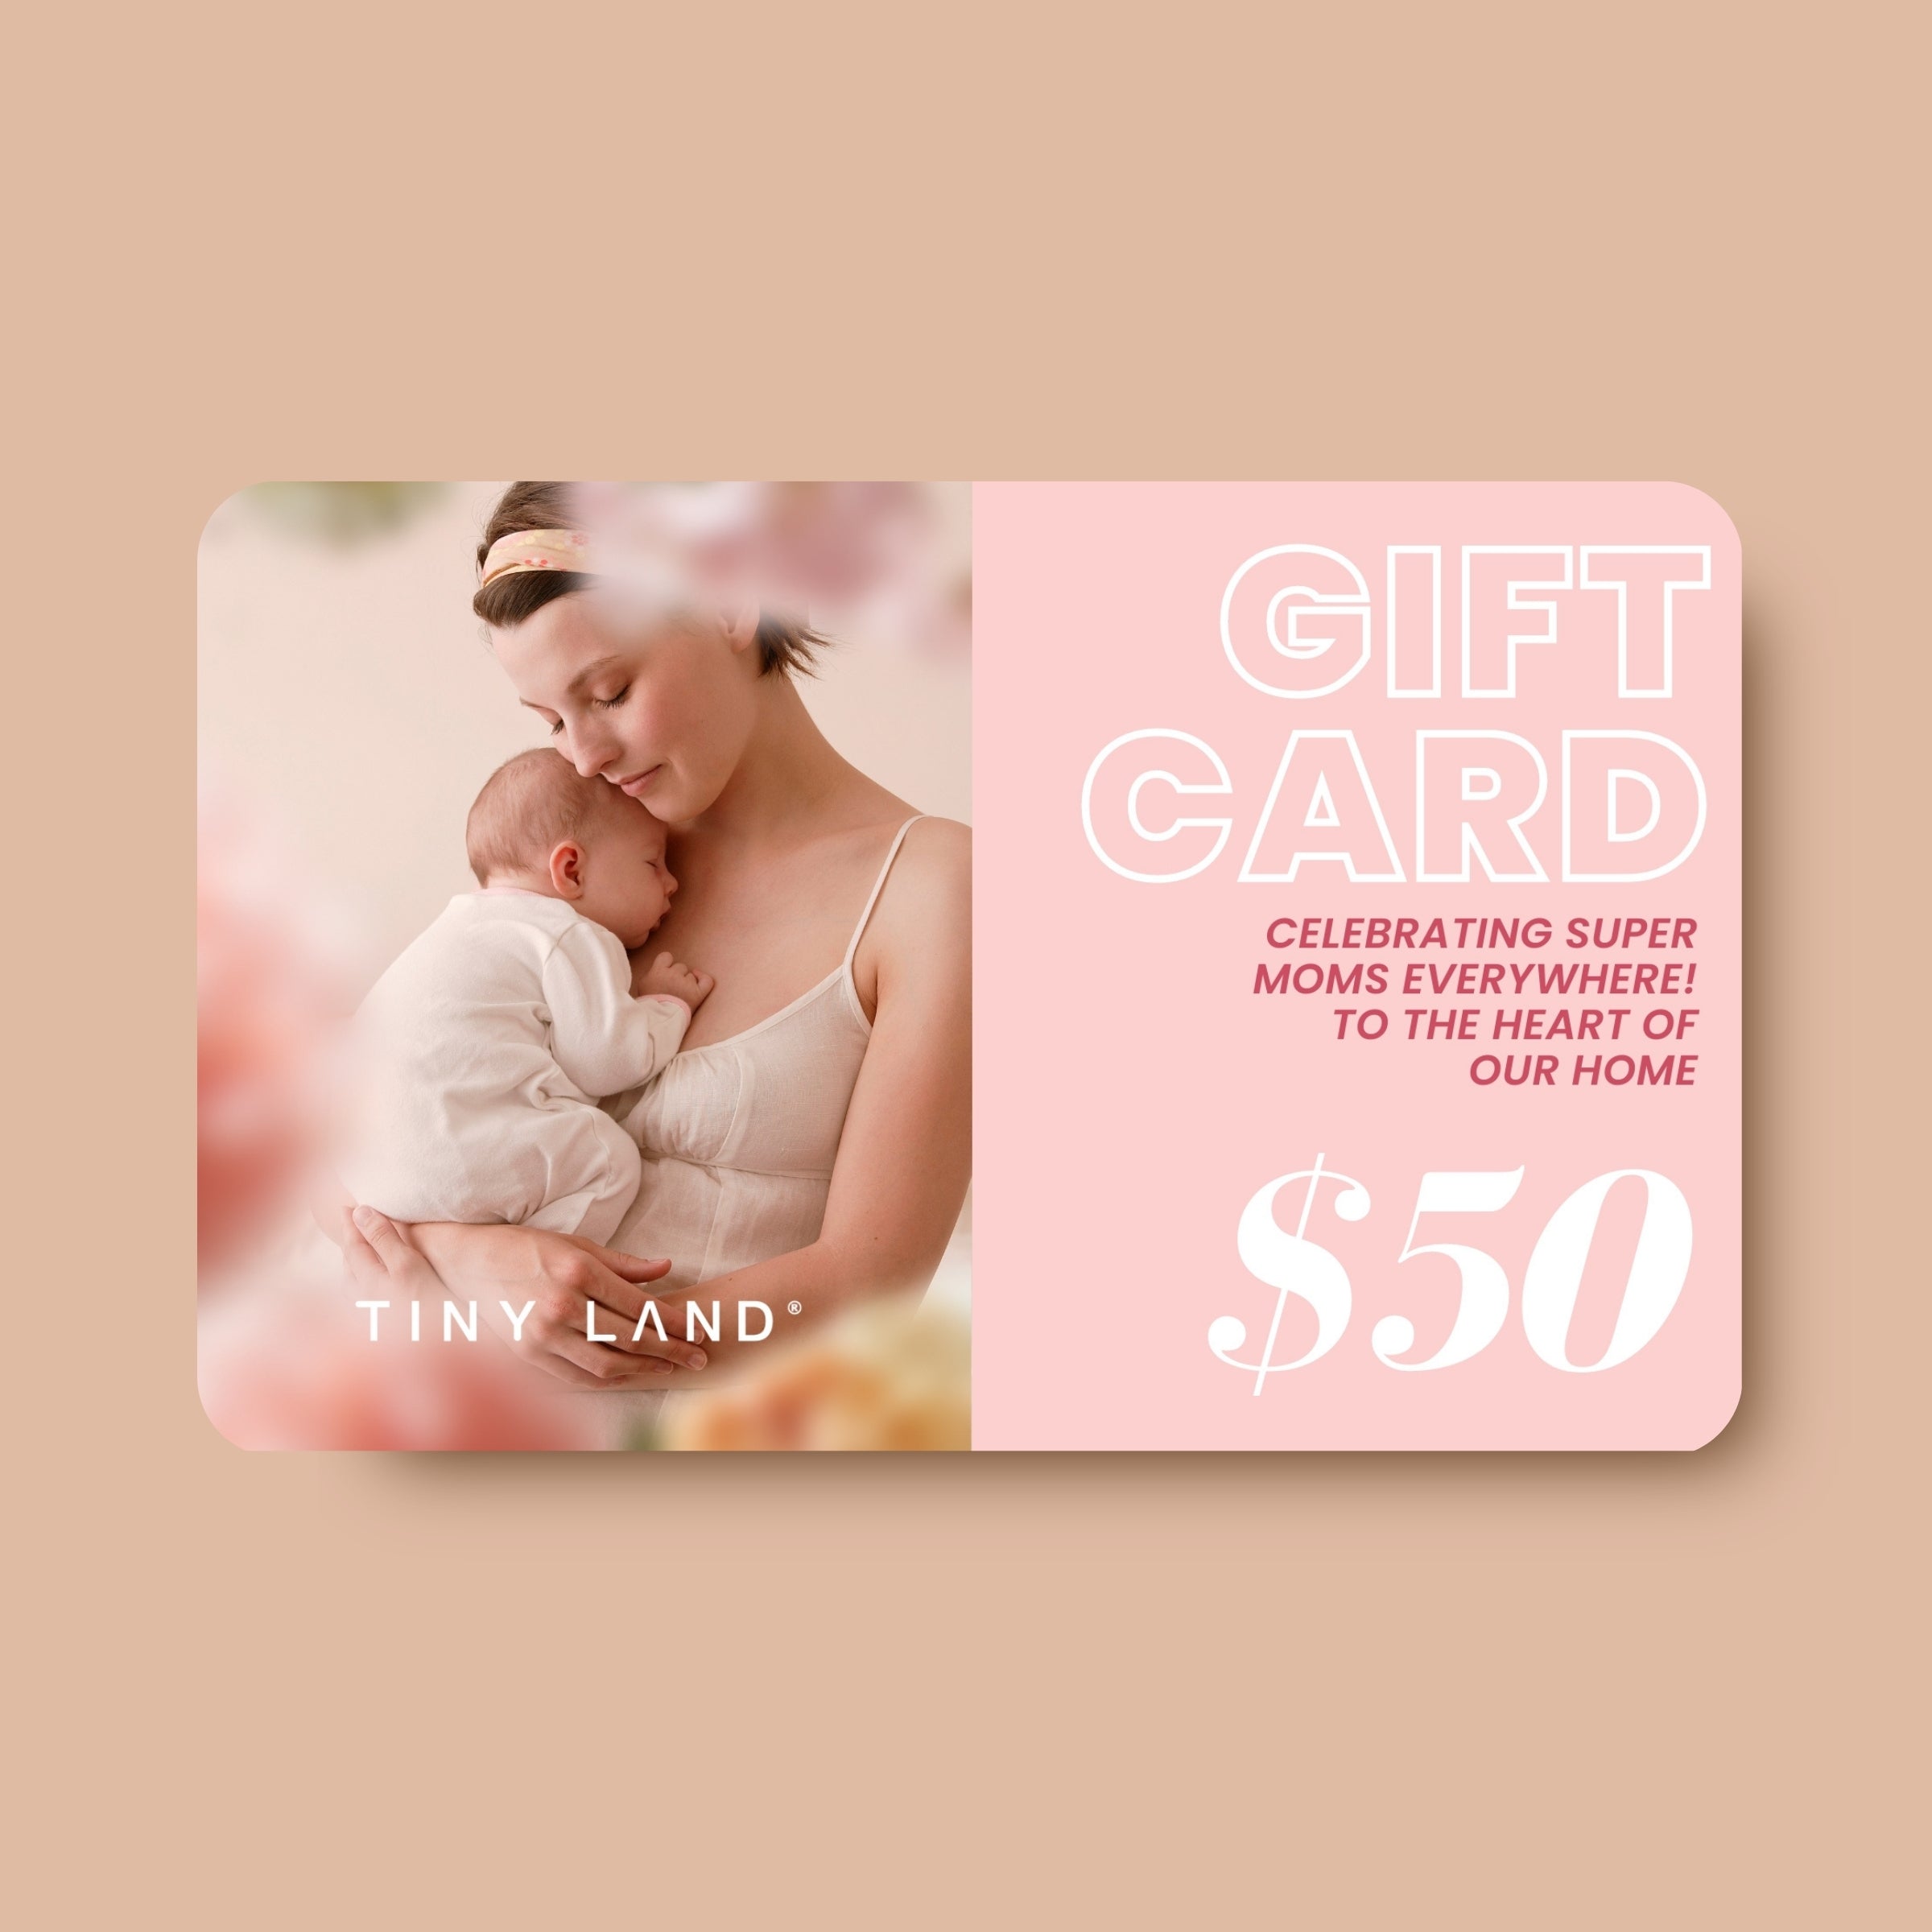 Mother's Day Gidtcard $50